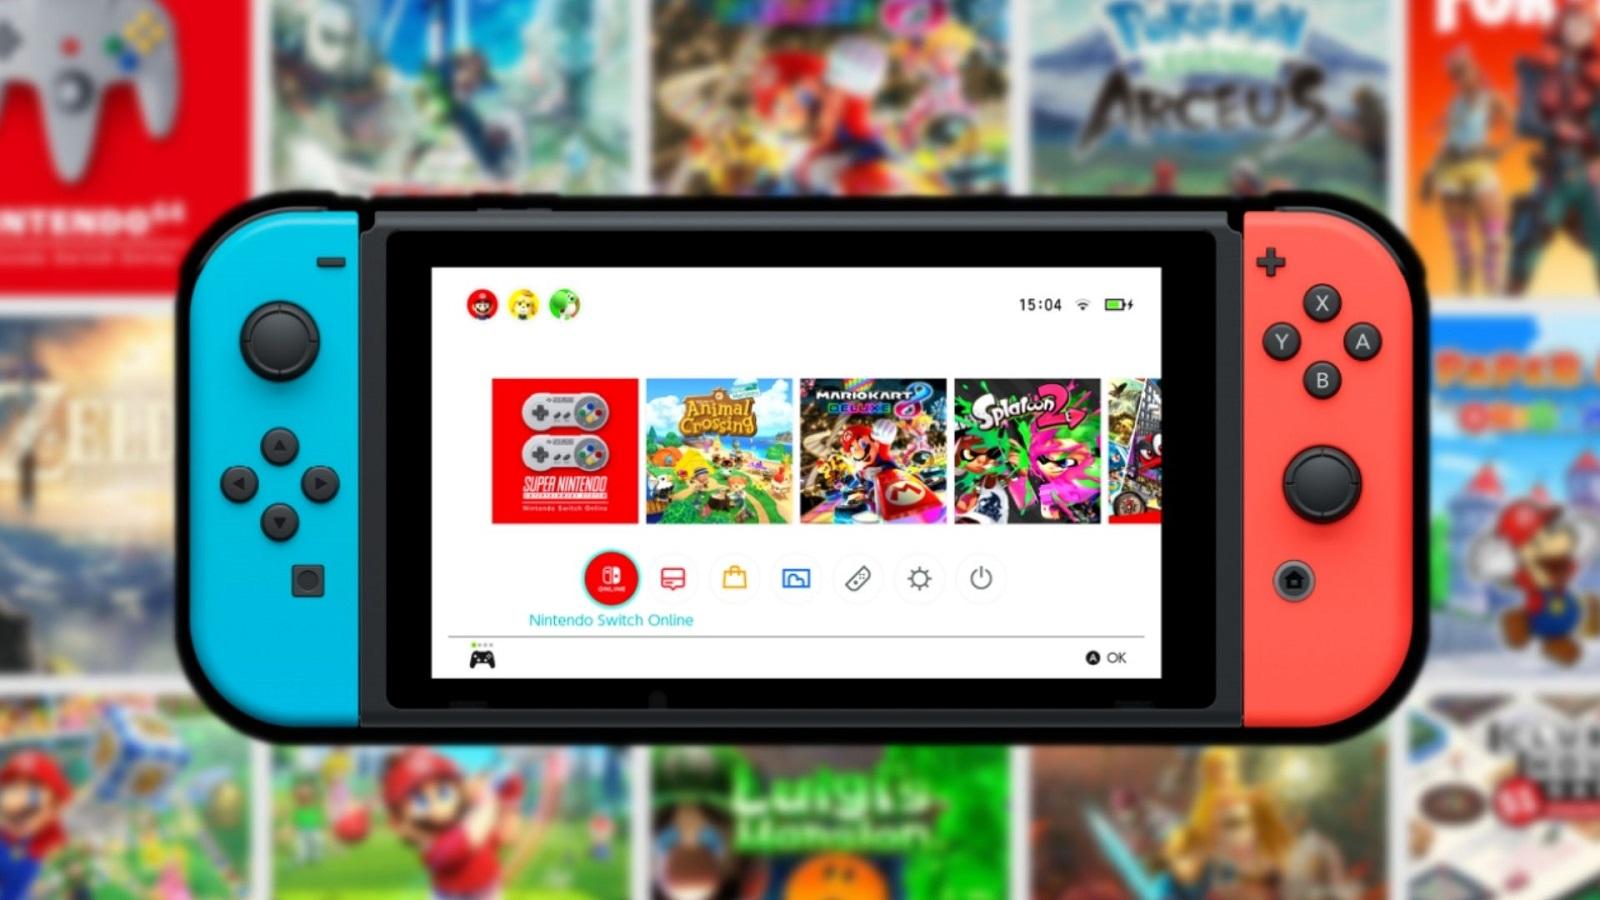 Roblox for Nintendo Switch Consoles